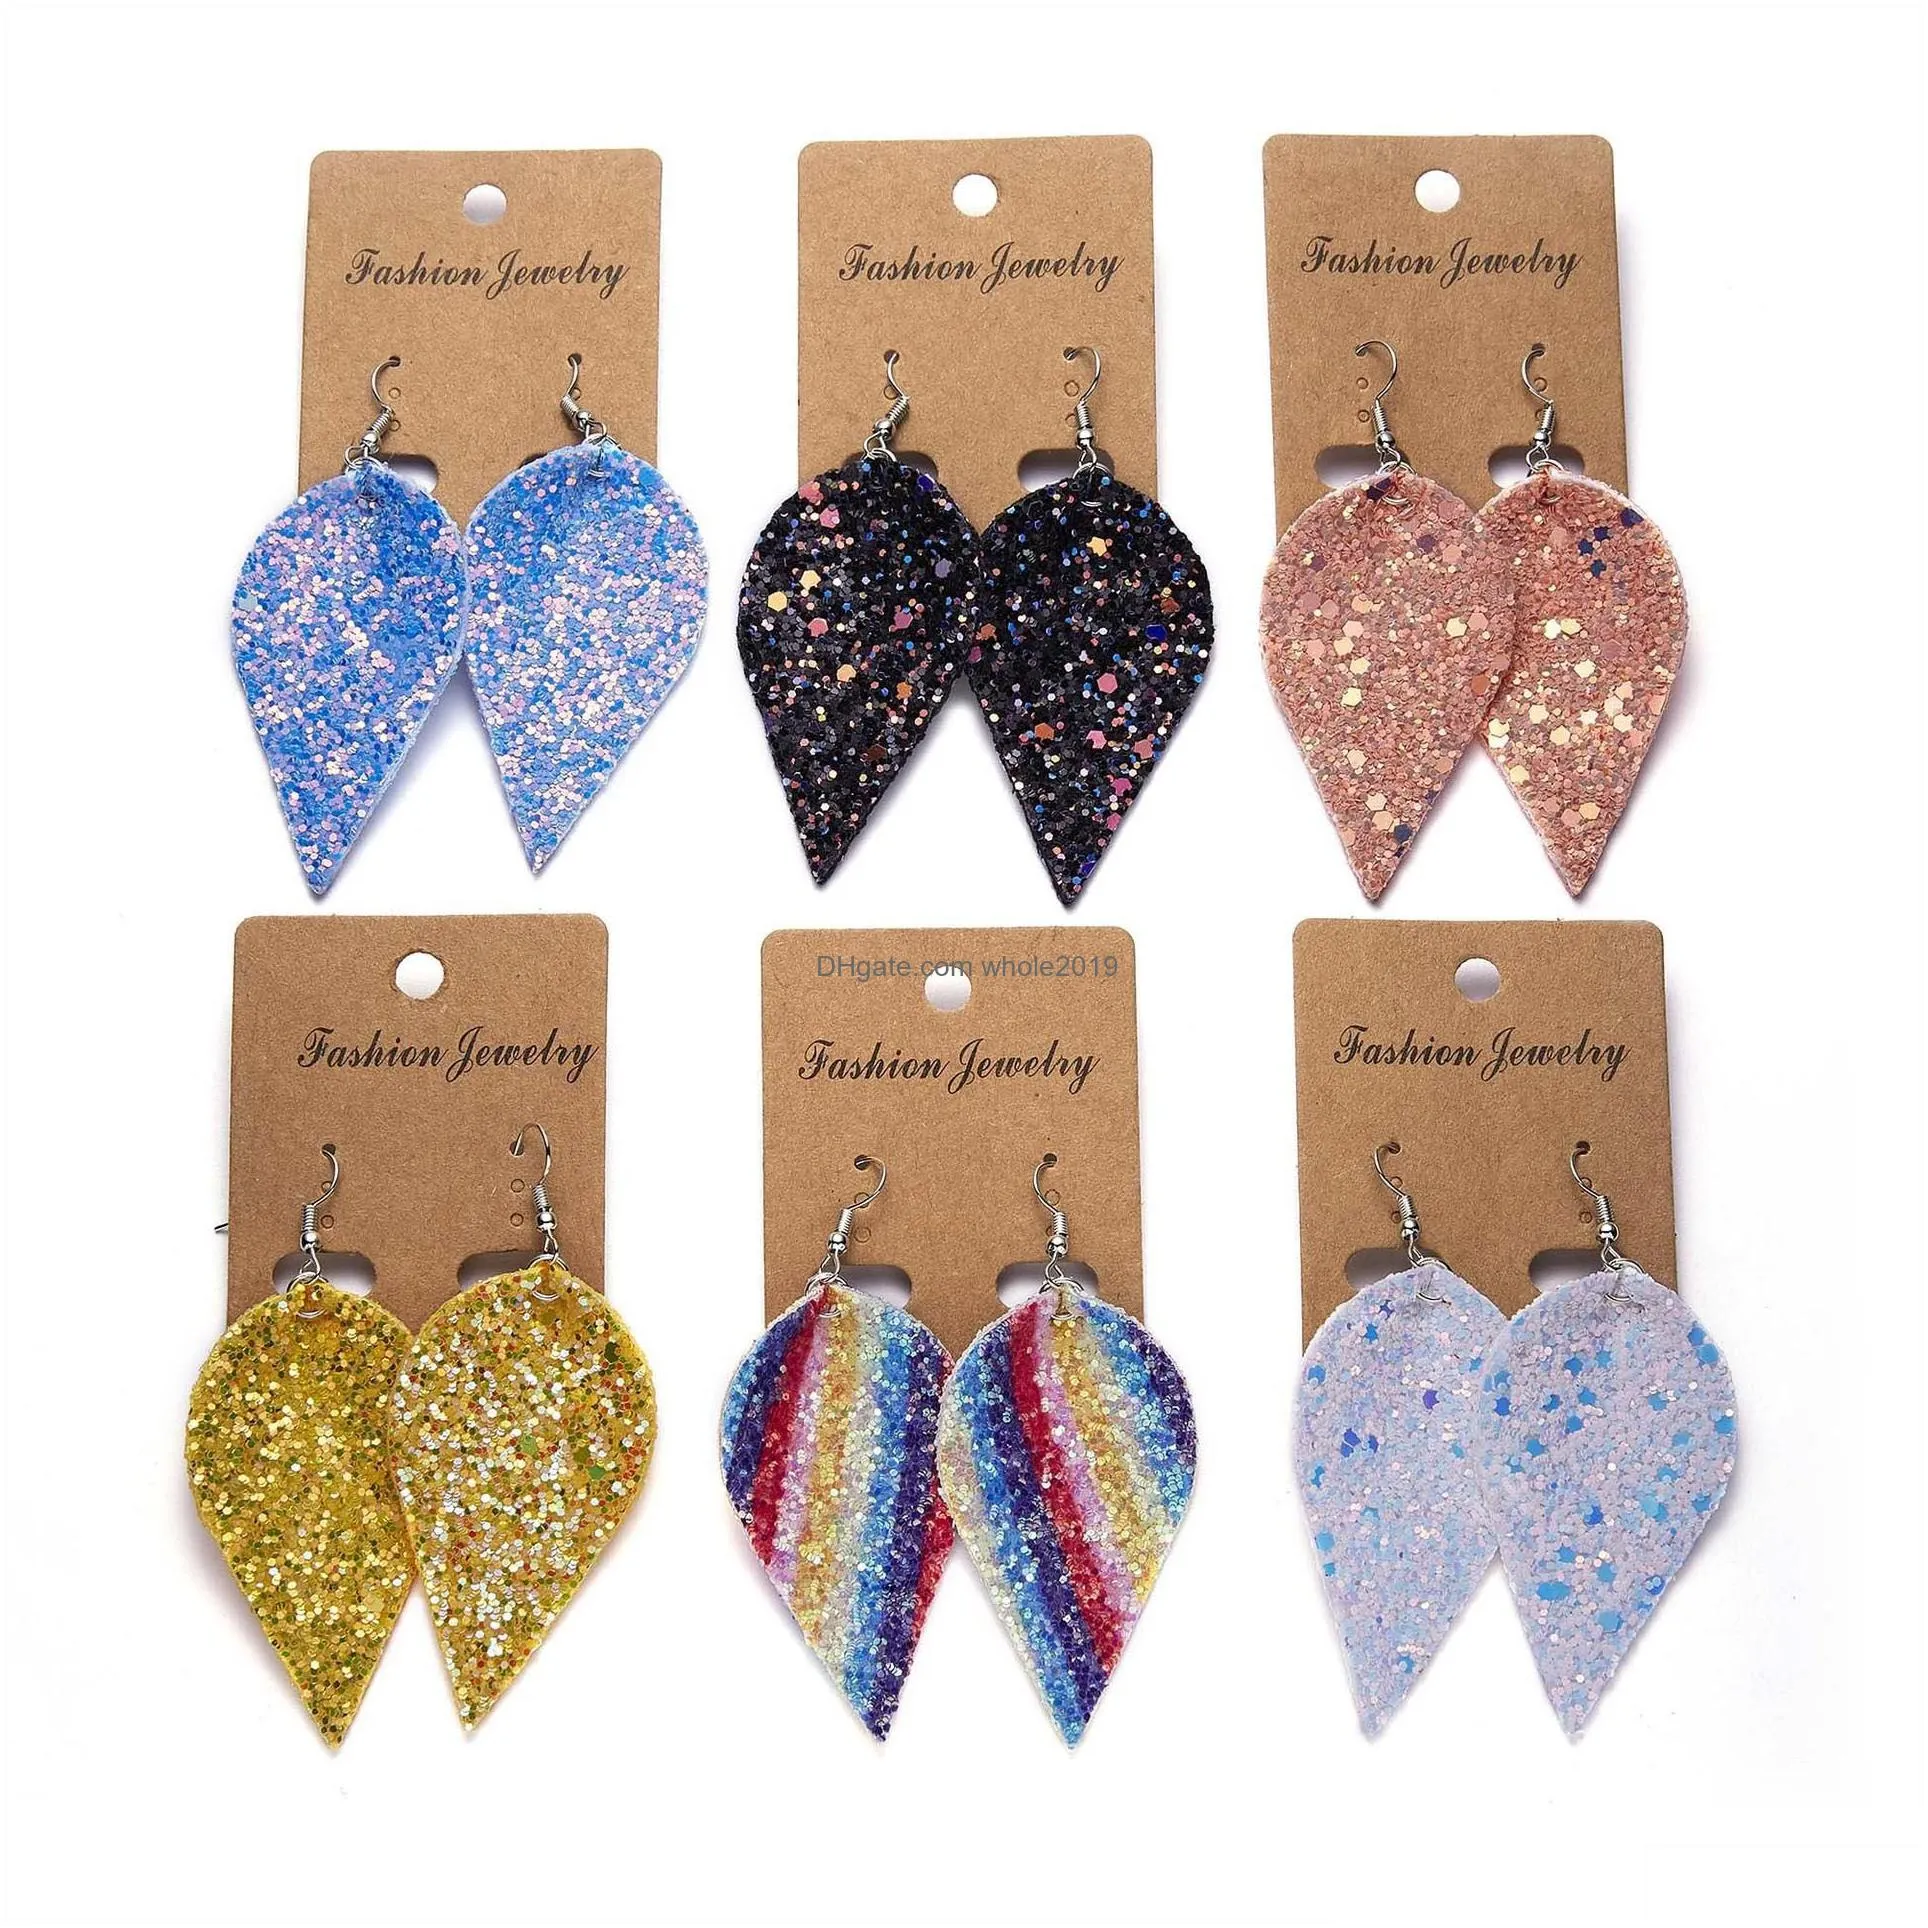 wholesale 12styles leafshaped leather doublesided sequined glitter earrings punk leaves leather charm pendant dangle hook earrings